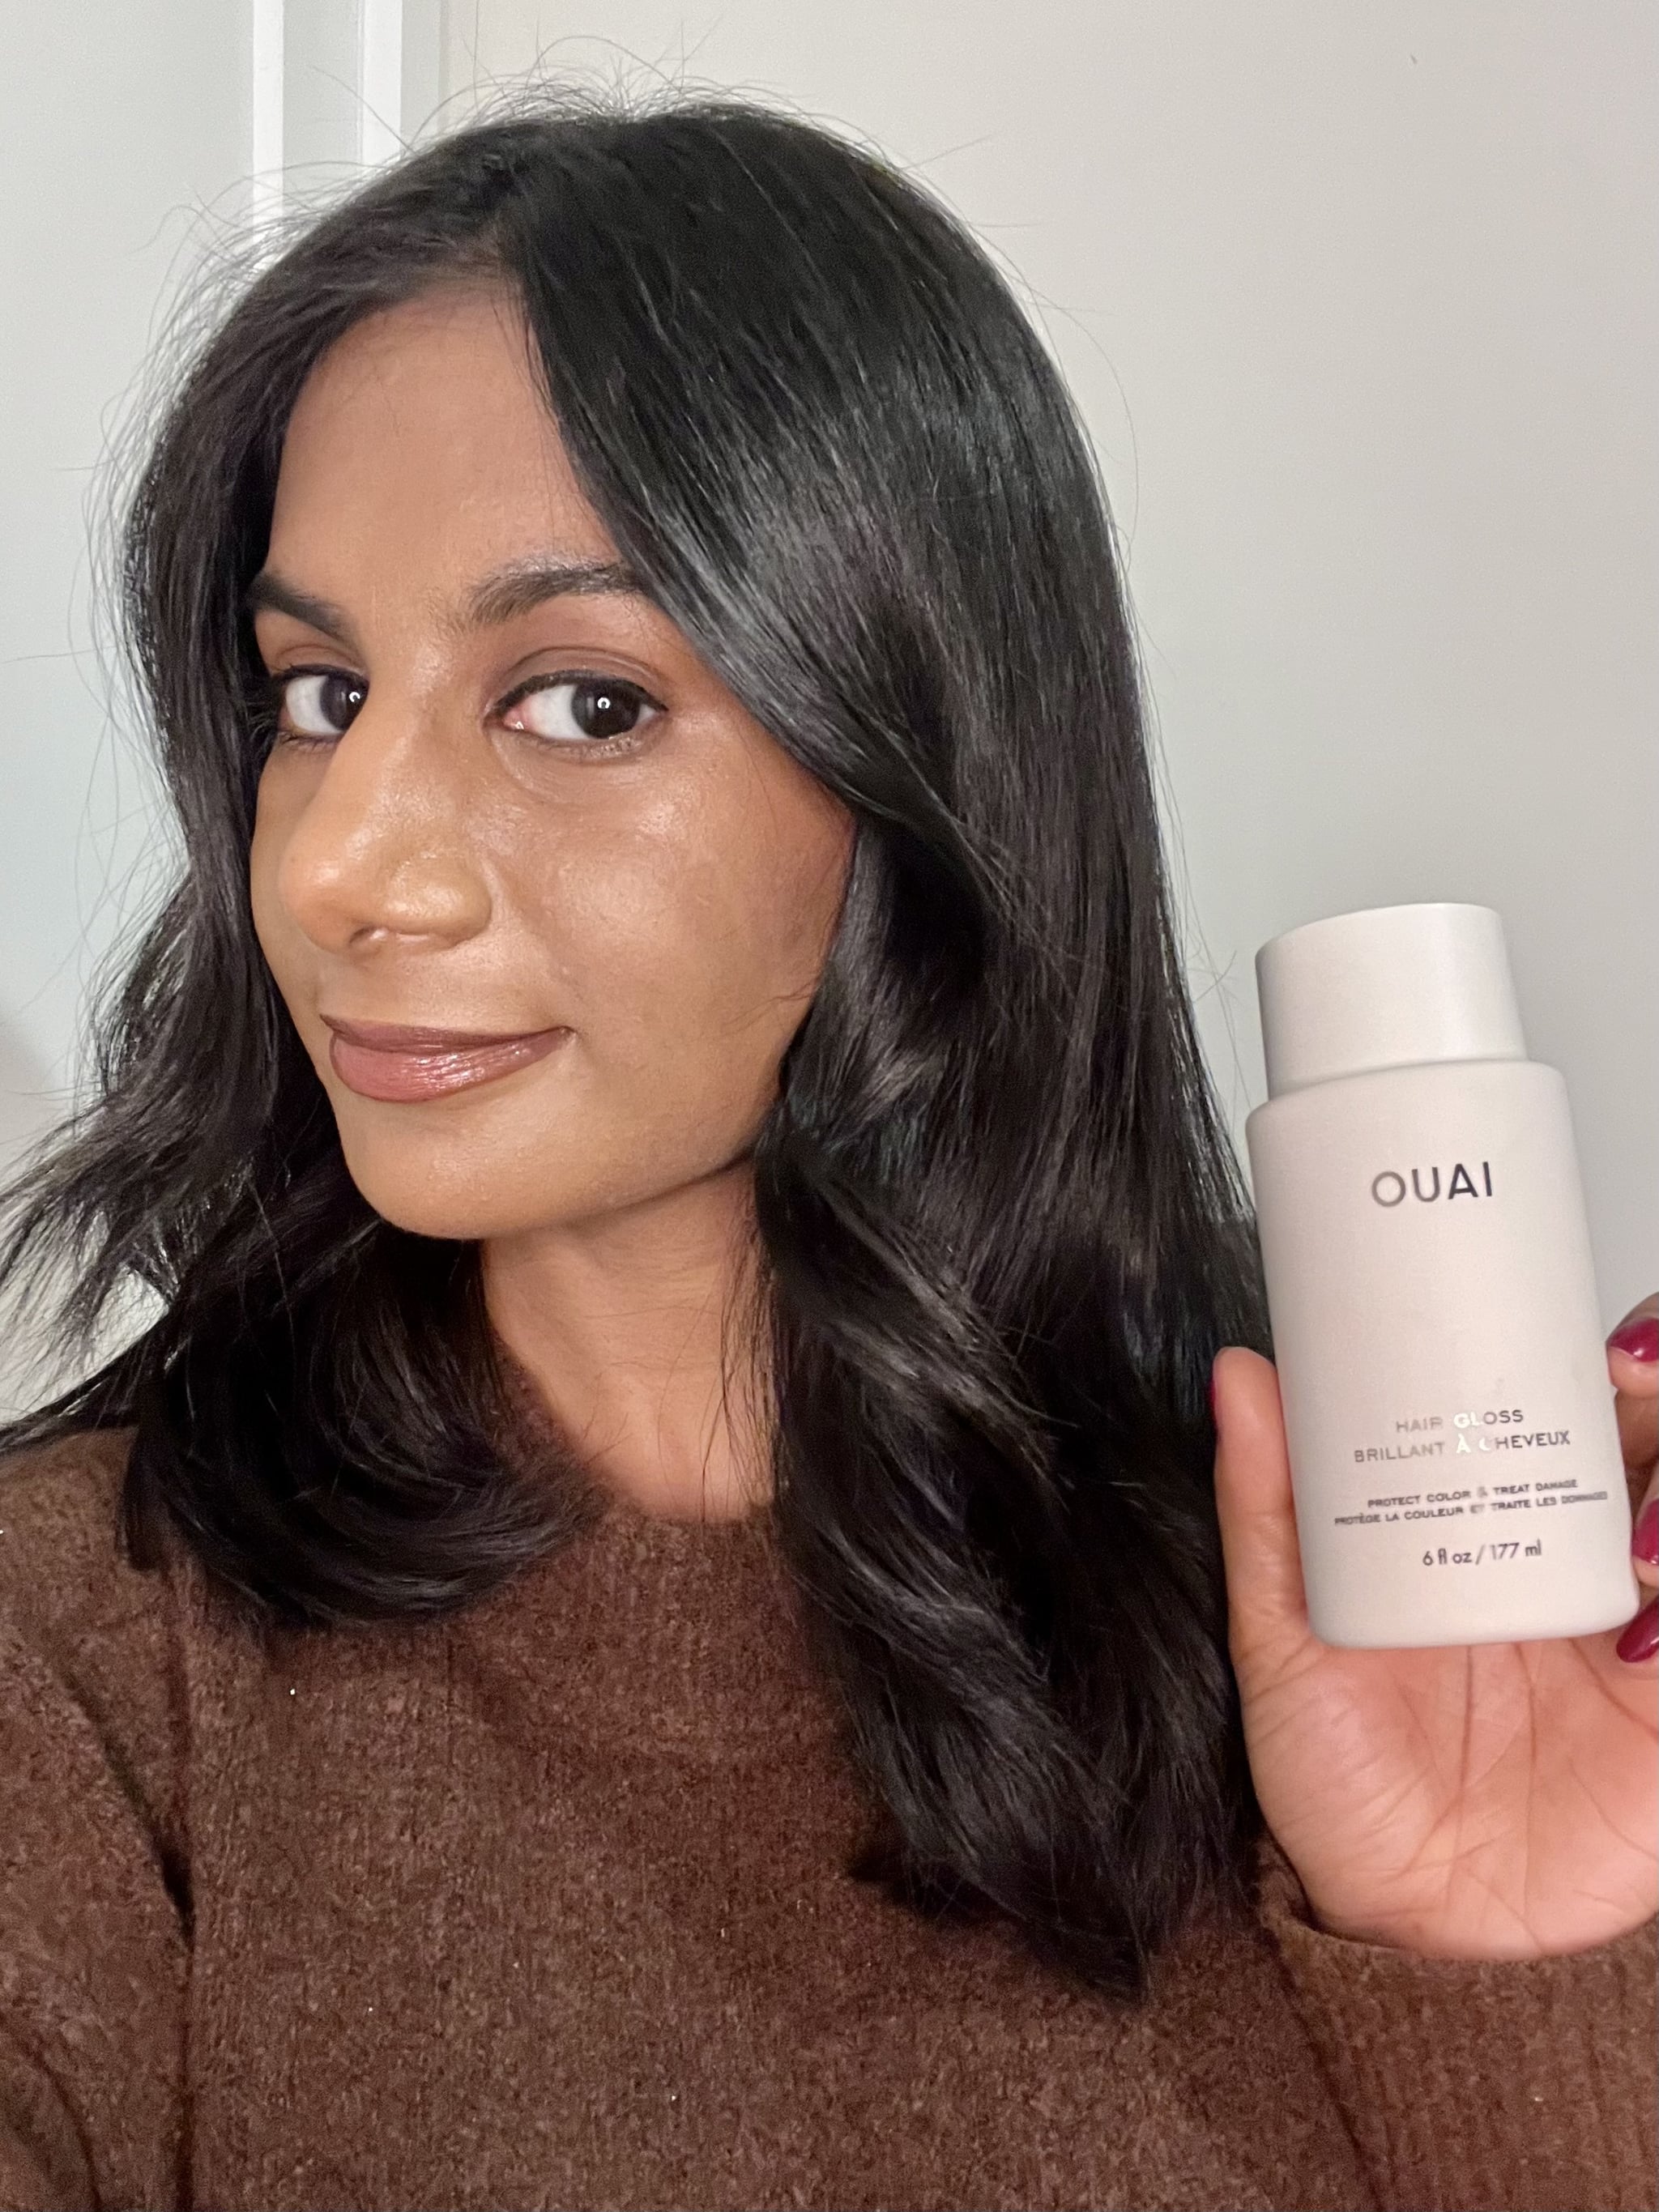 Woman holding the Ouai Hair Gloss and showing the results.